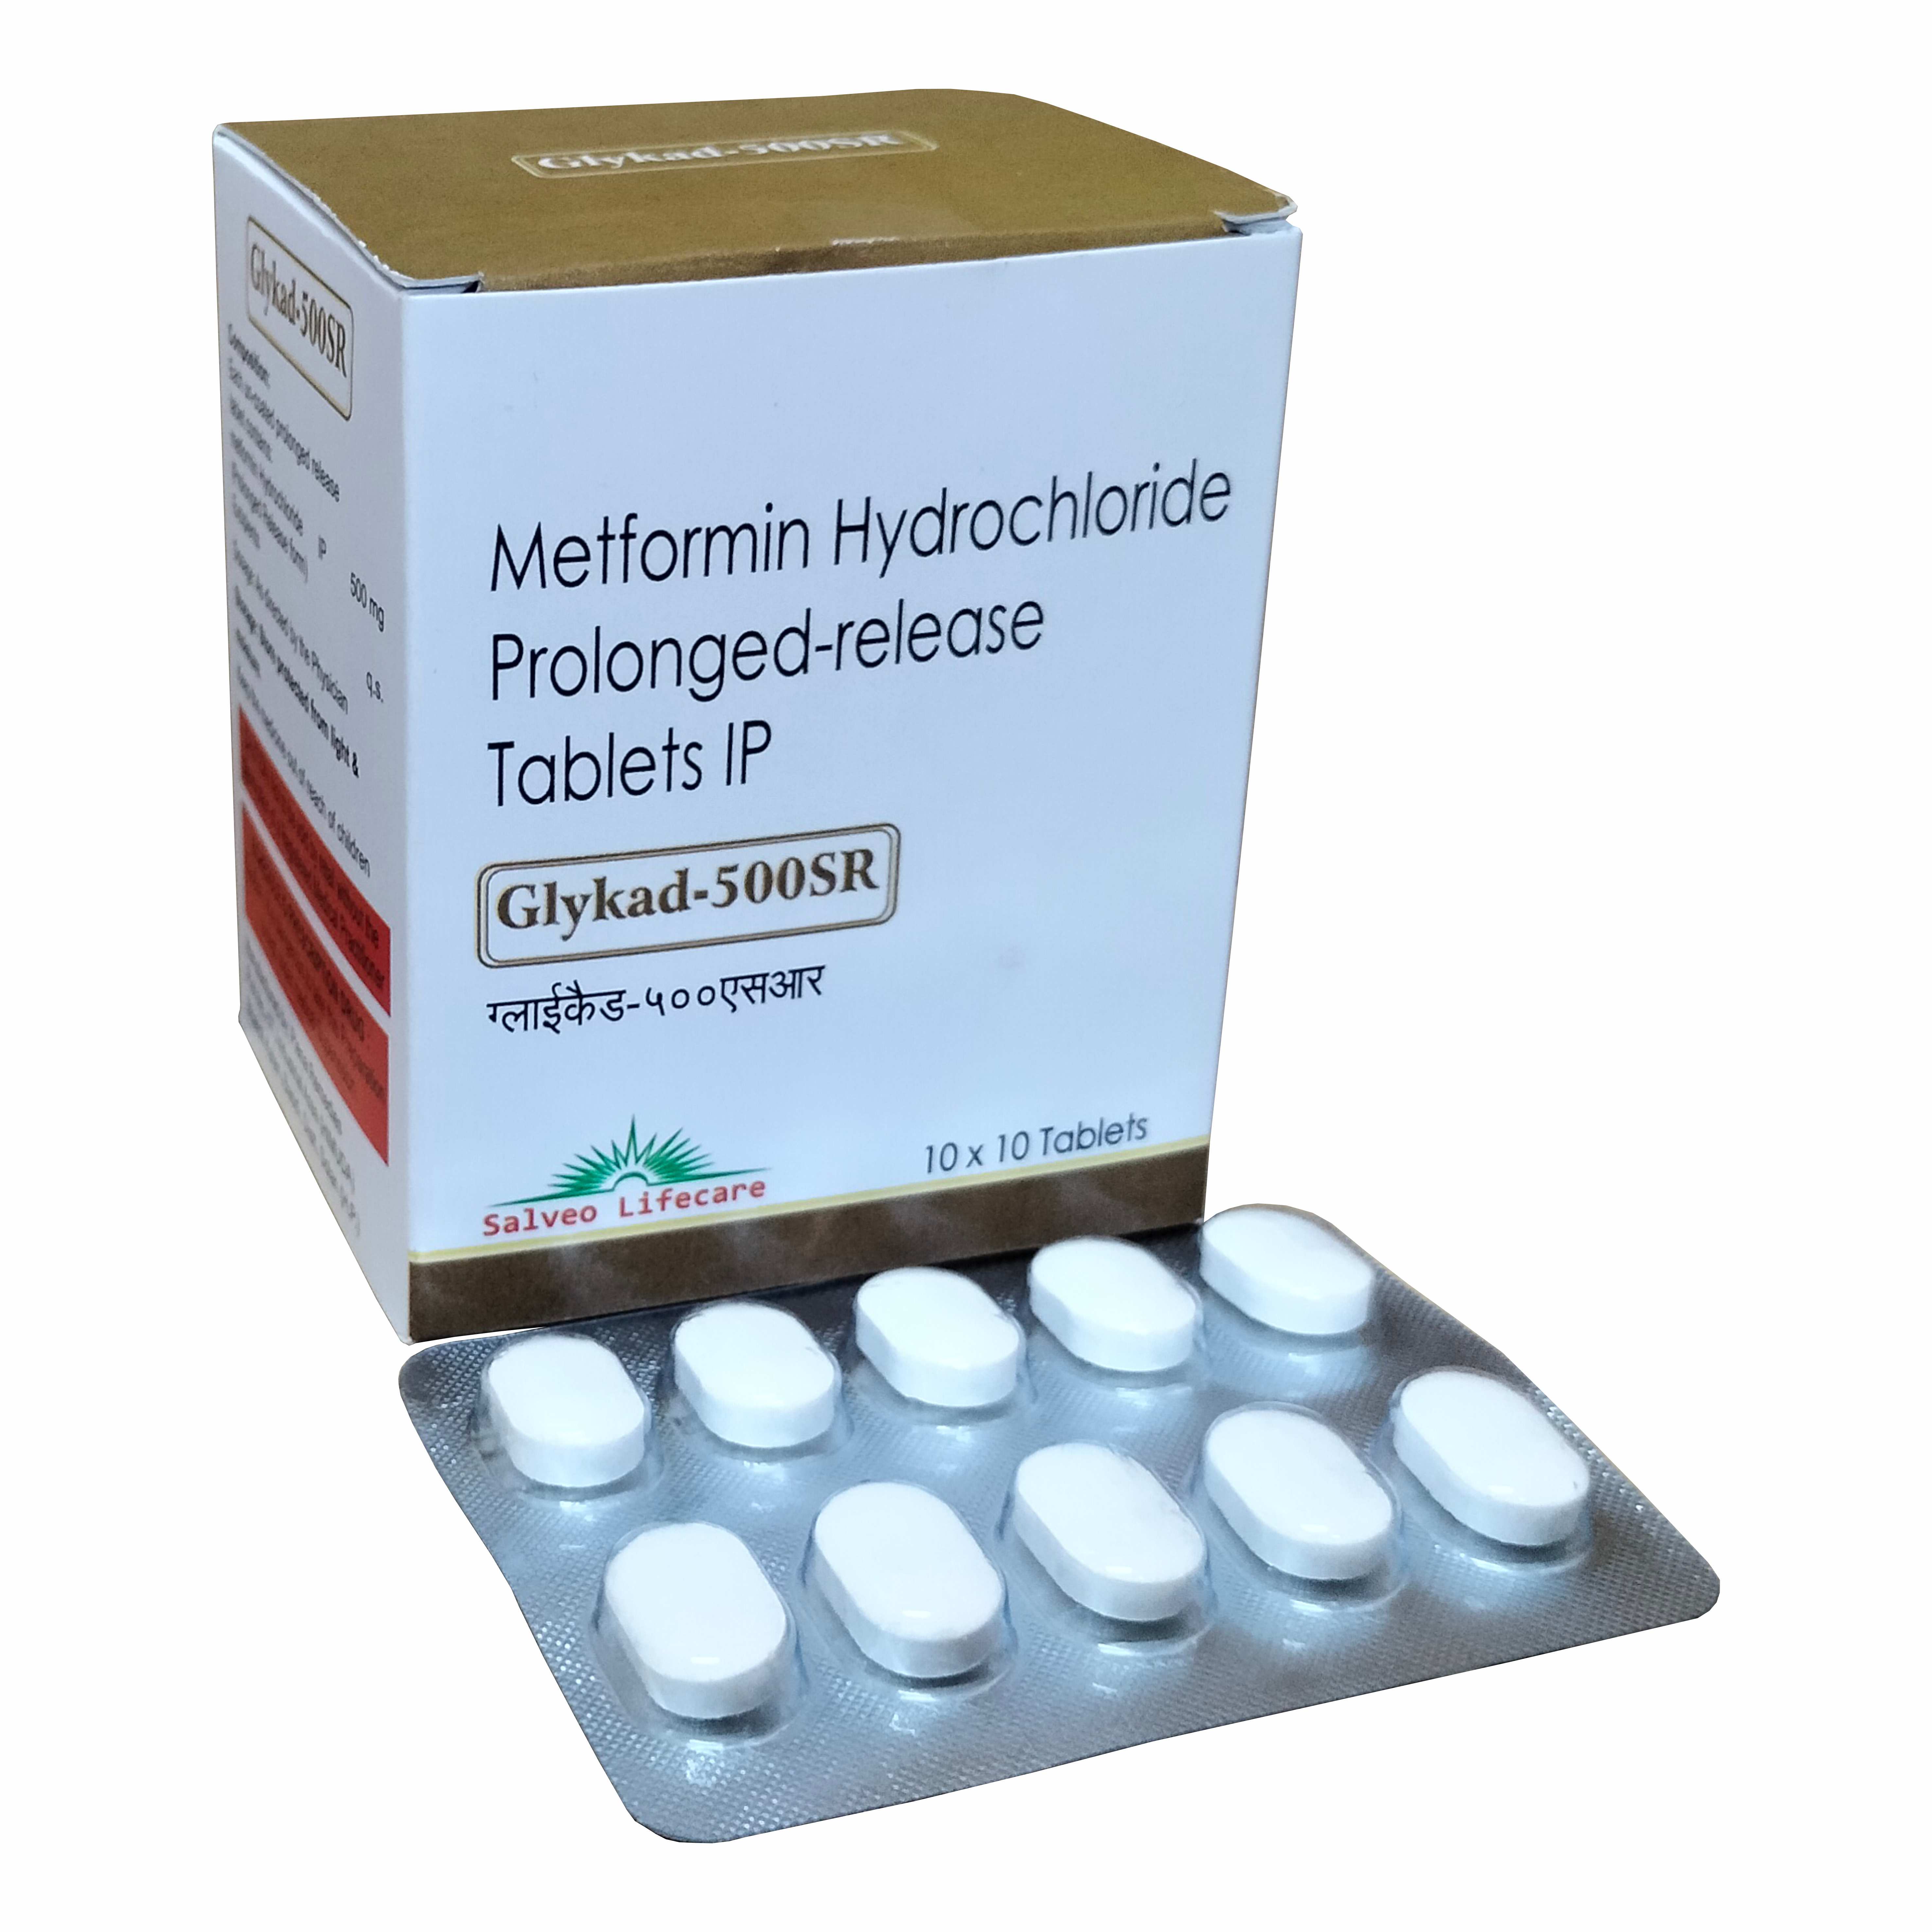 each tablet containes: metformin 500 mg sustained release